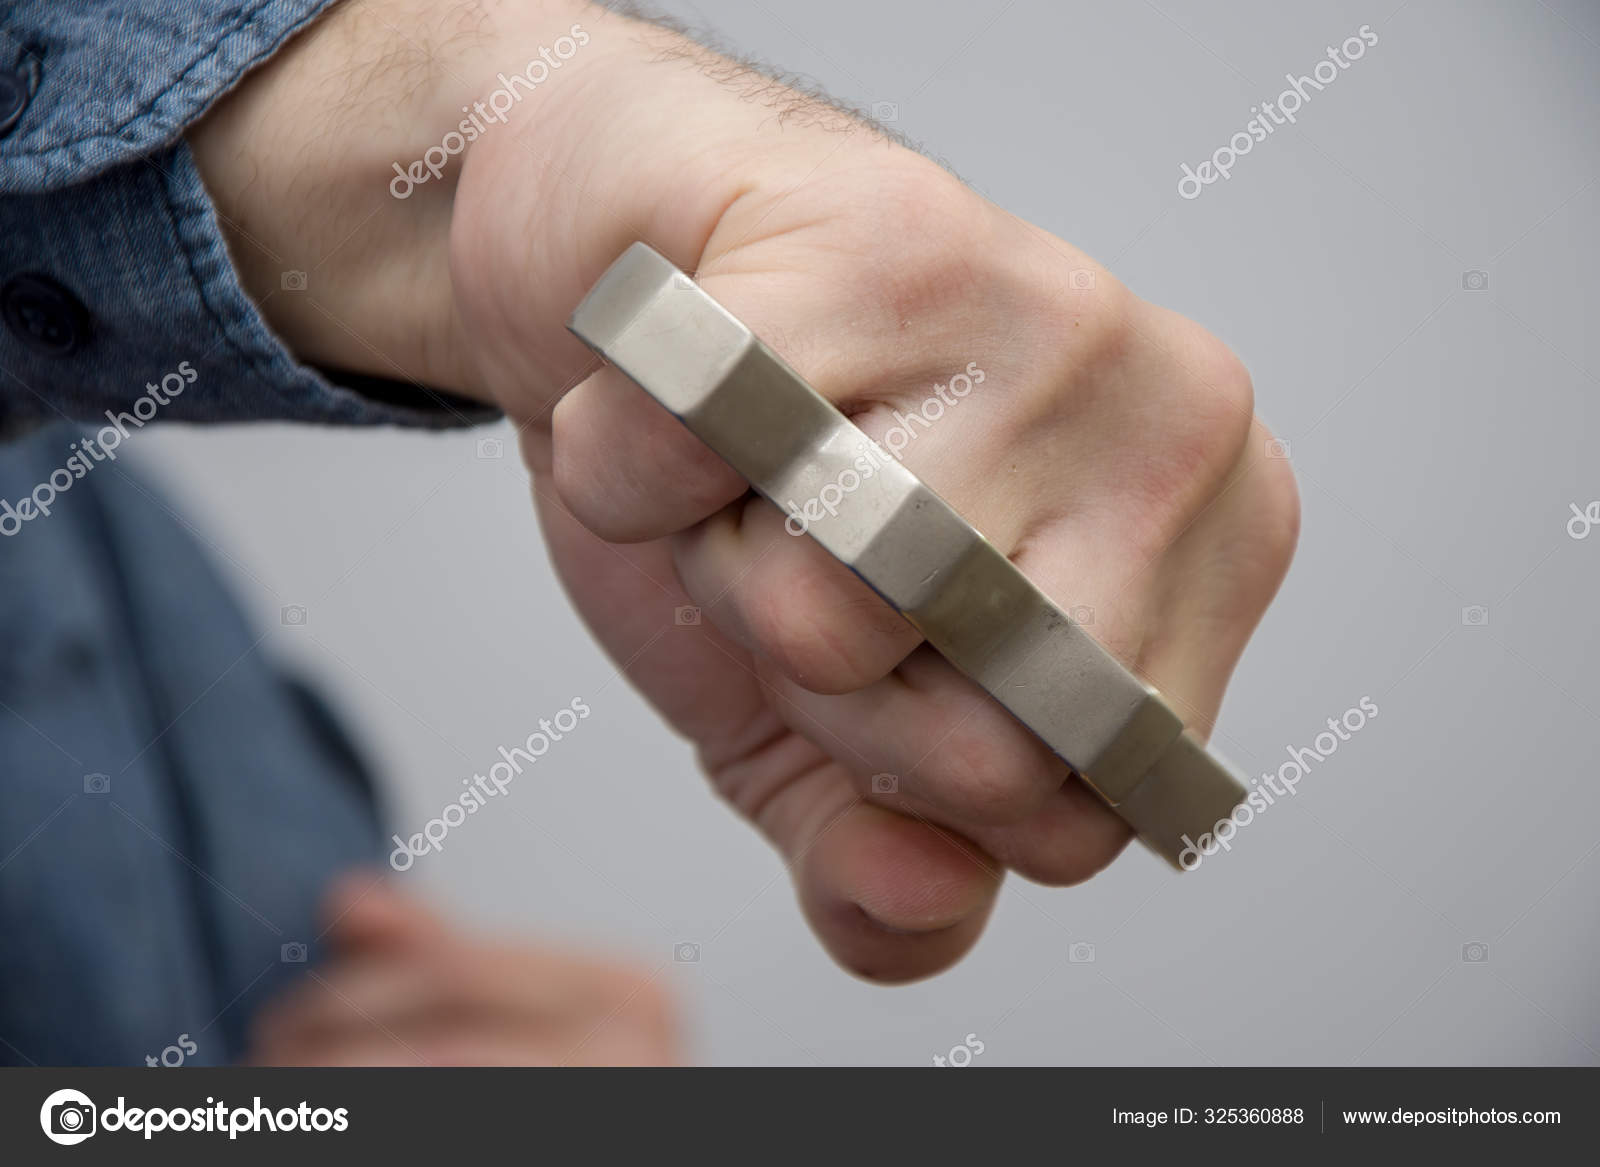 Blow with Brass Knuckles. the Hand of an Elderly Woman Clutches a